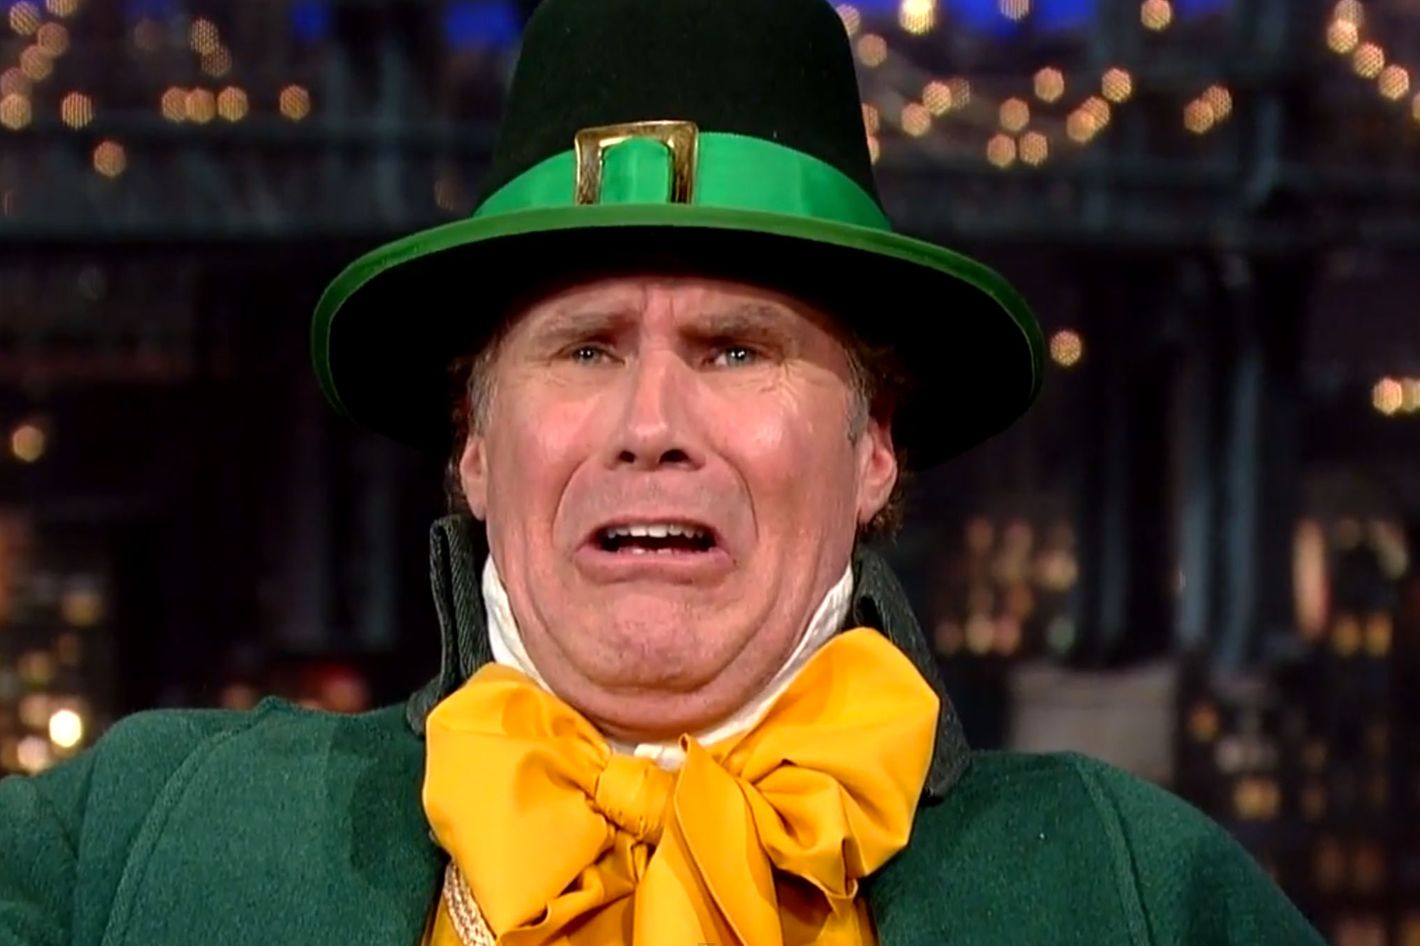 Will Ferrell spoofs Harry Caray on 'Letterman